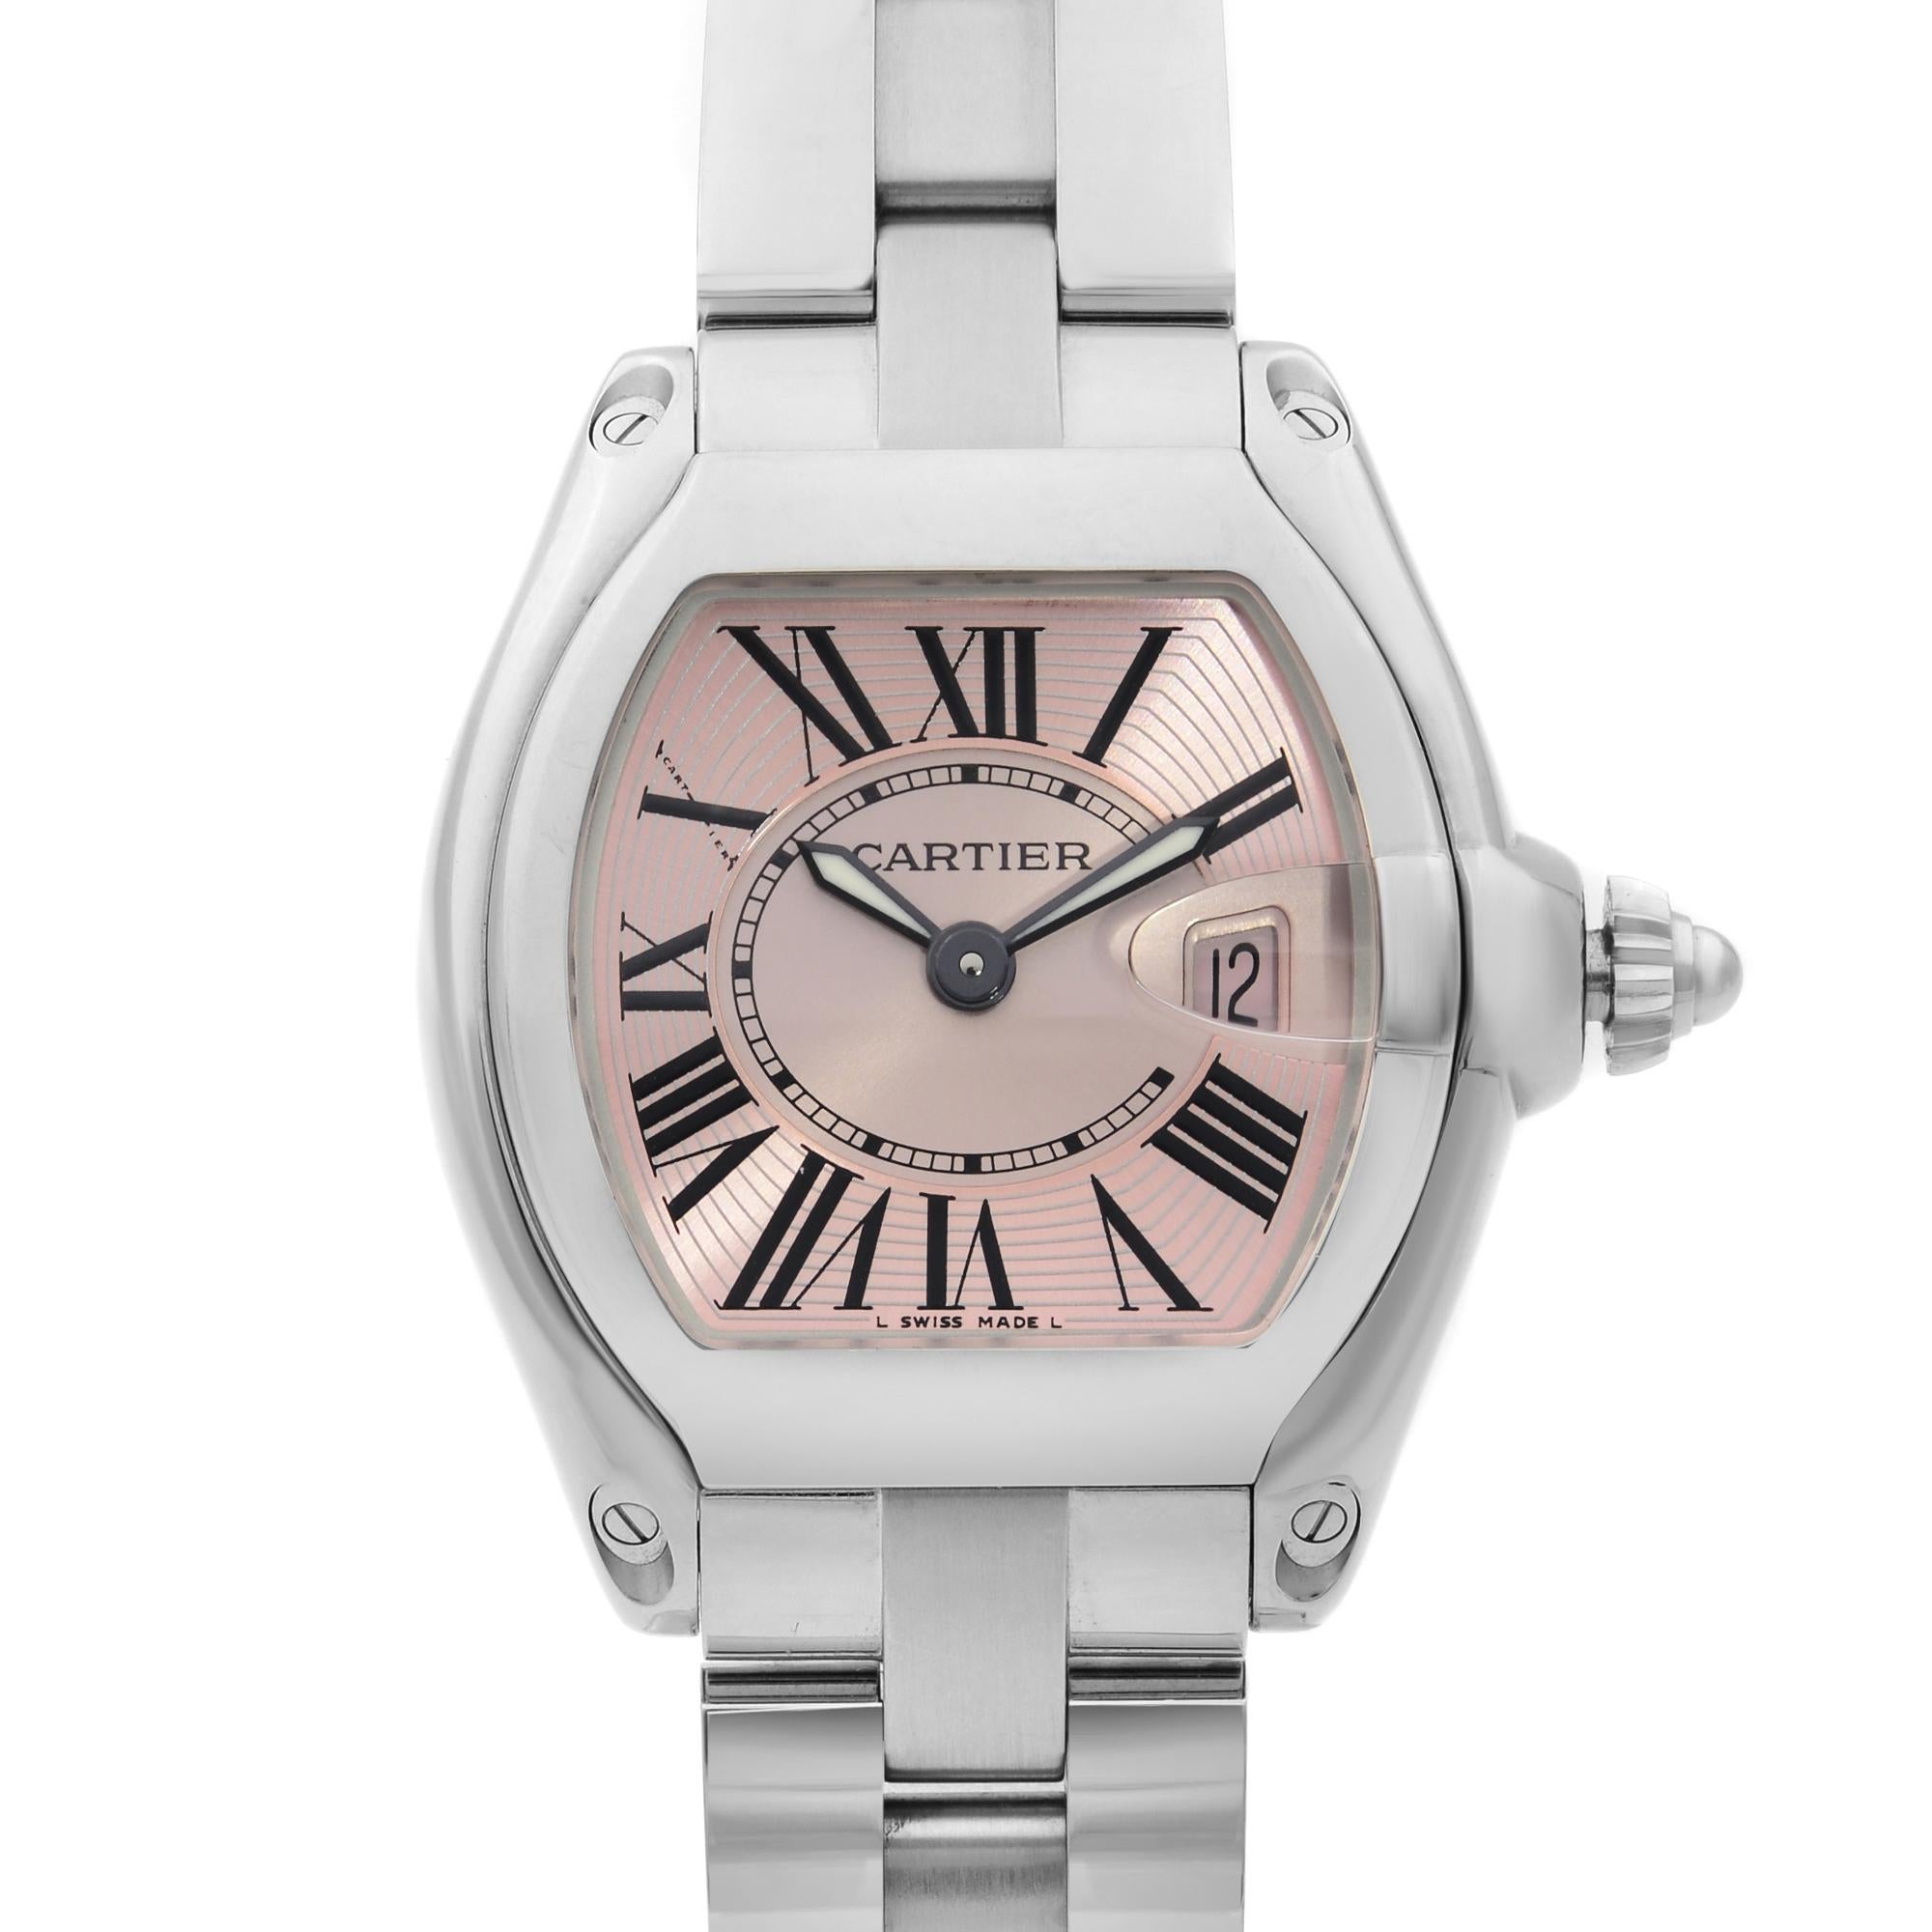 This pre-owned Cartier Roadster  W62017V3 is a beautiful Ladie's timepiece that is powered by quartz (battery) movement which is cased in a stainless steel case. It has a tonneau shape face, date indicator dial and has hand roman numerals style